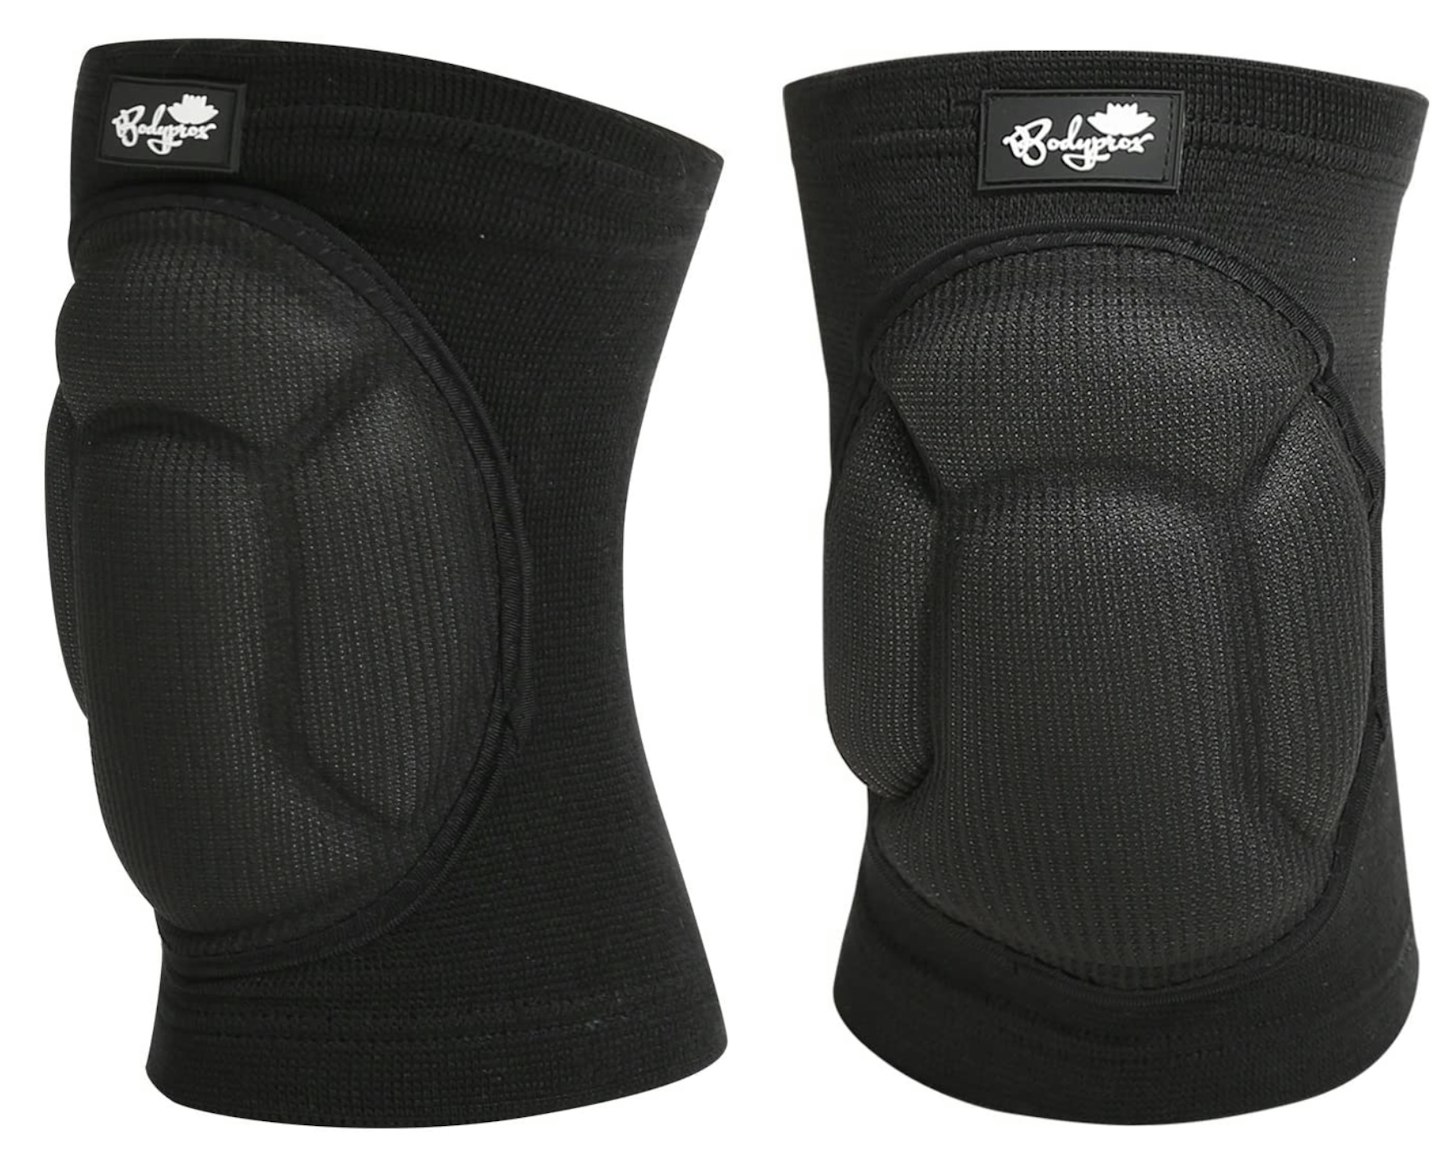 Everwell Protective Knee Pads Set, Protective Gear Set with Knee